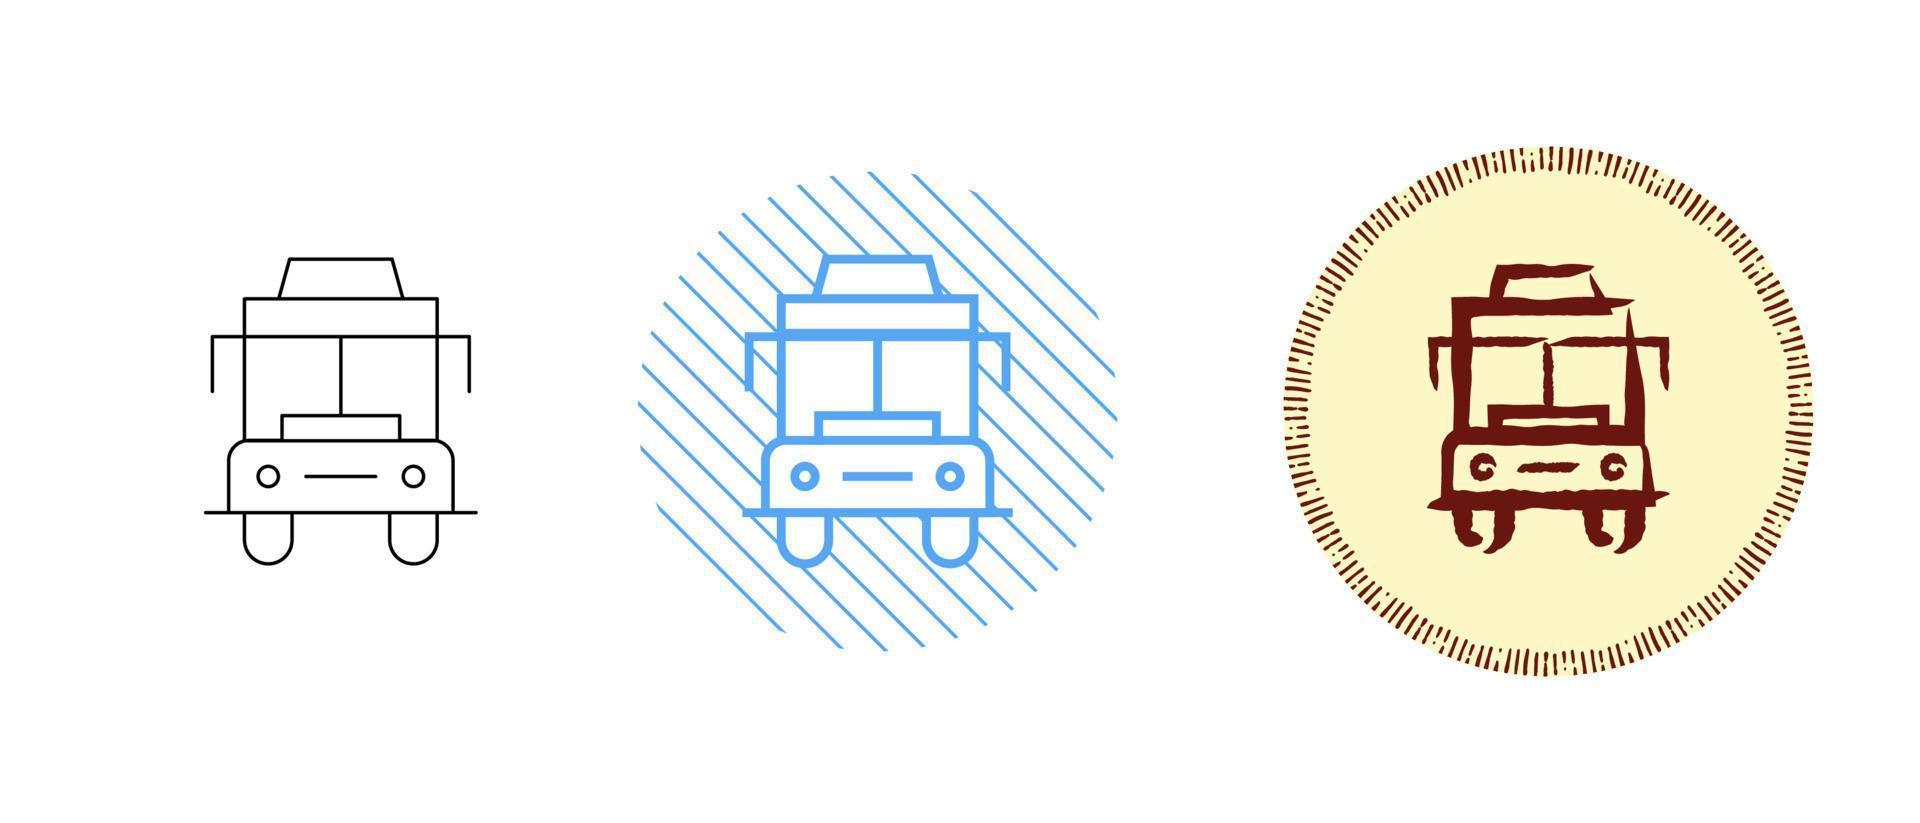 This is a set of contour and color school bus icons vector